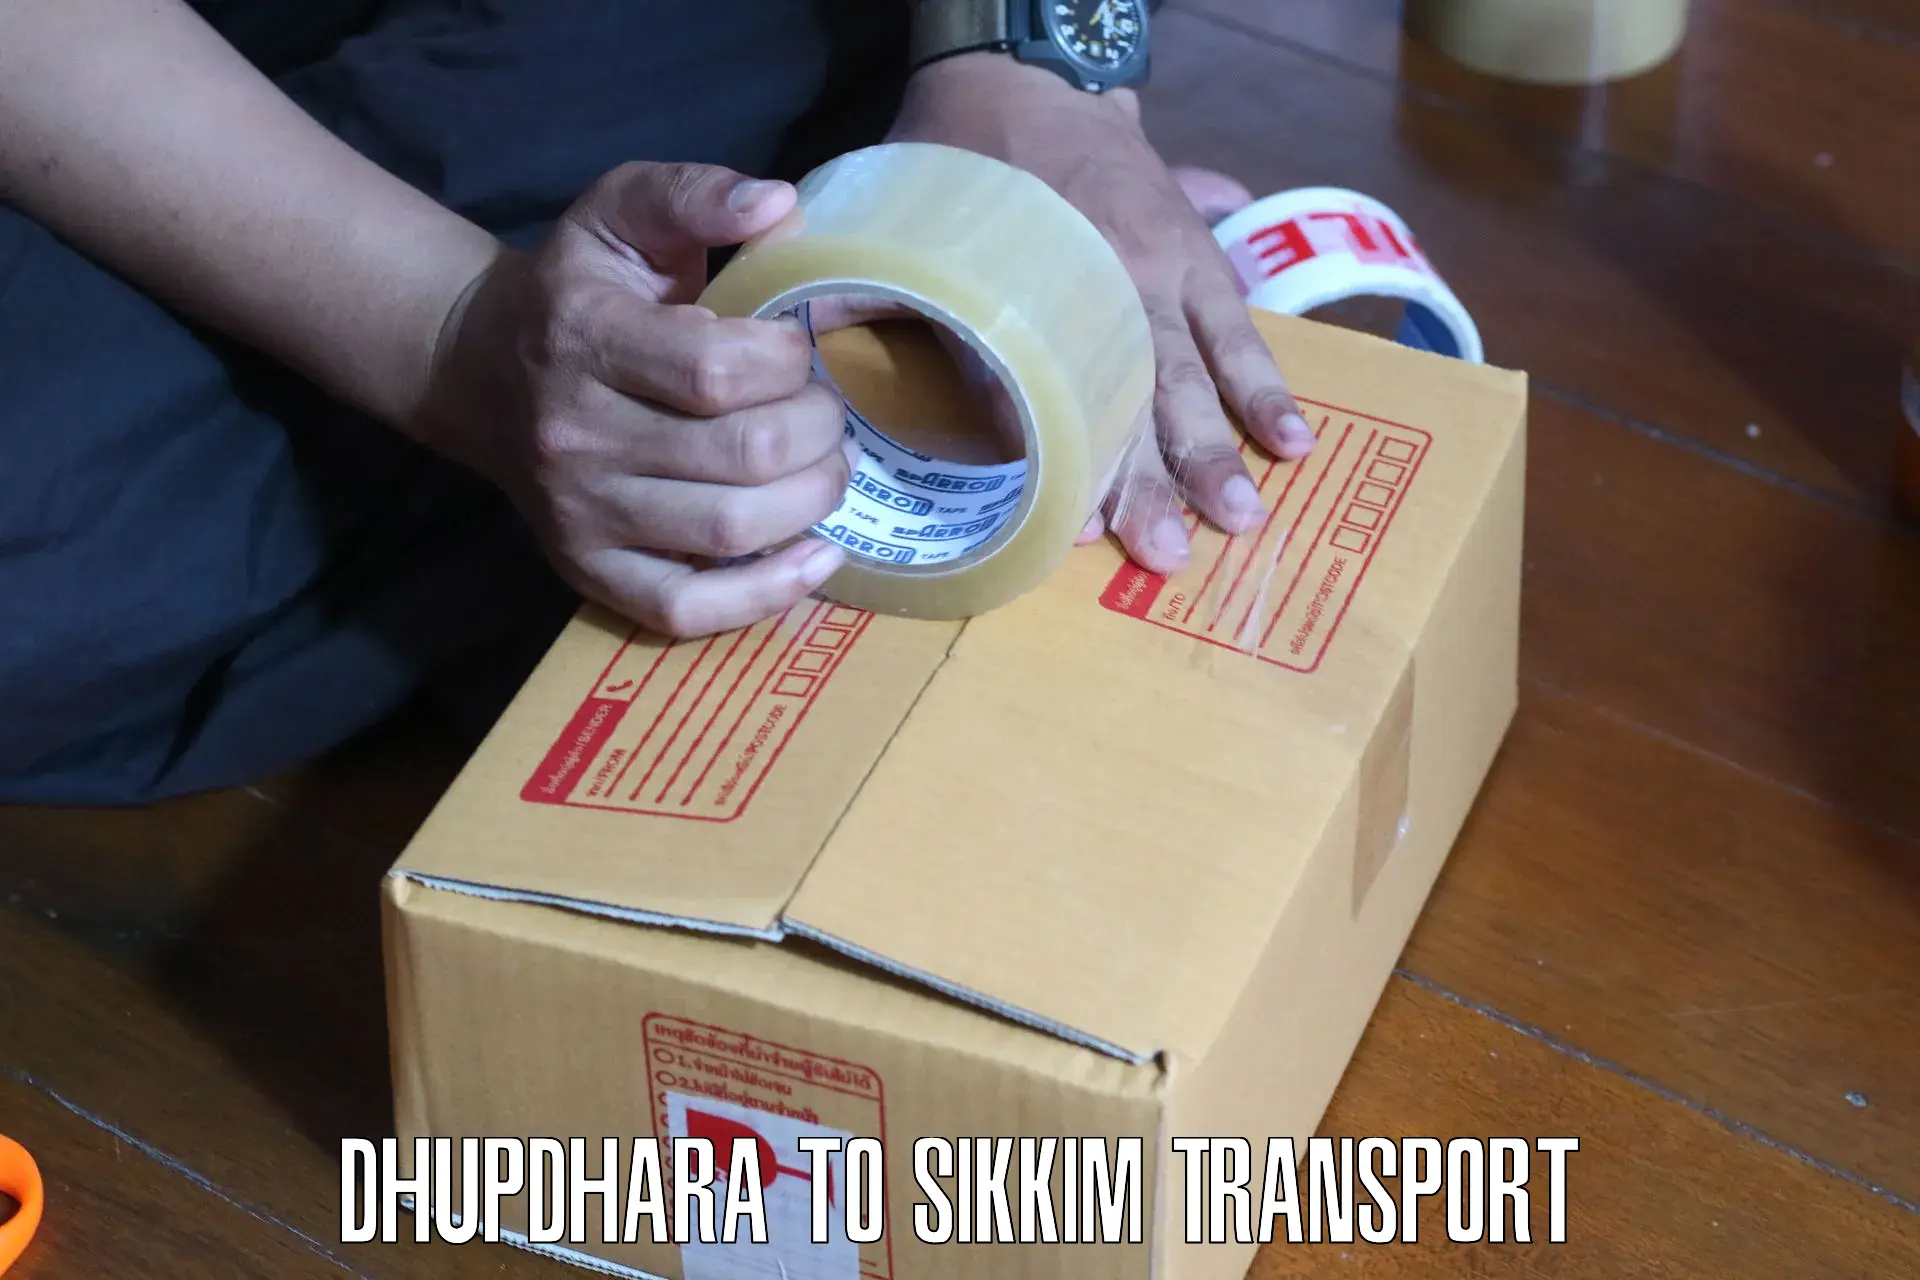 Daily transport service Dhupdhara to East Sikkim